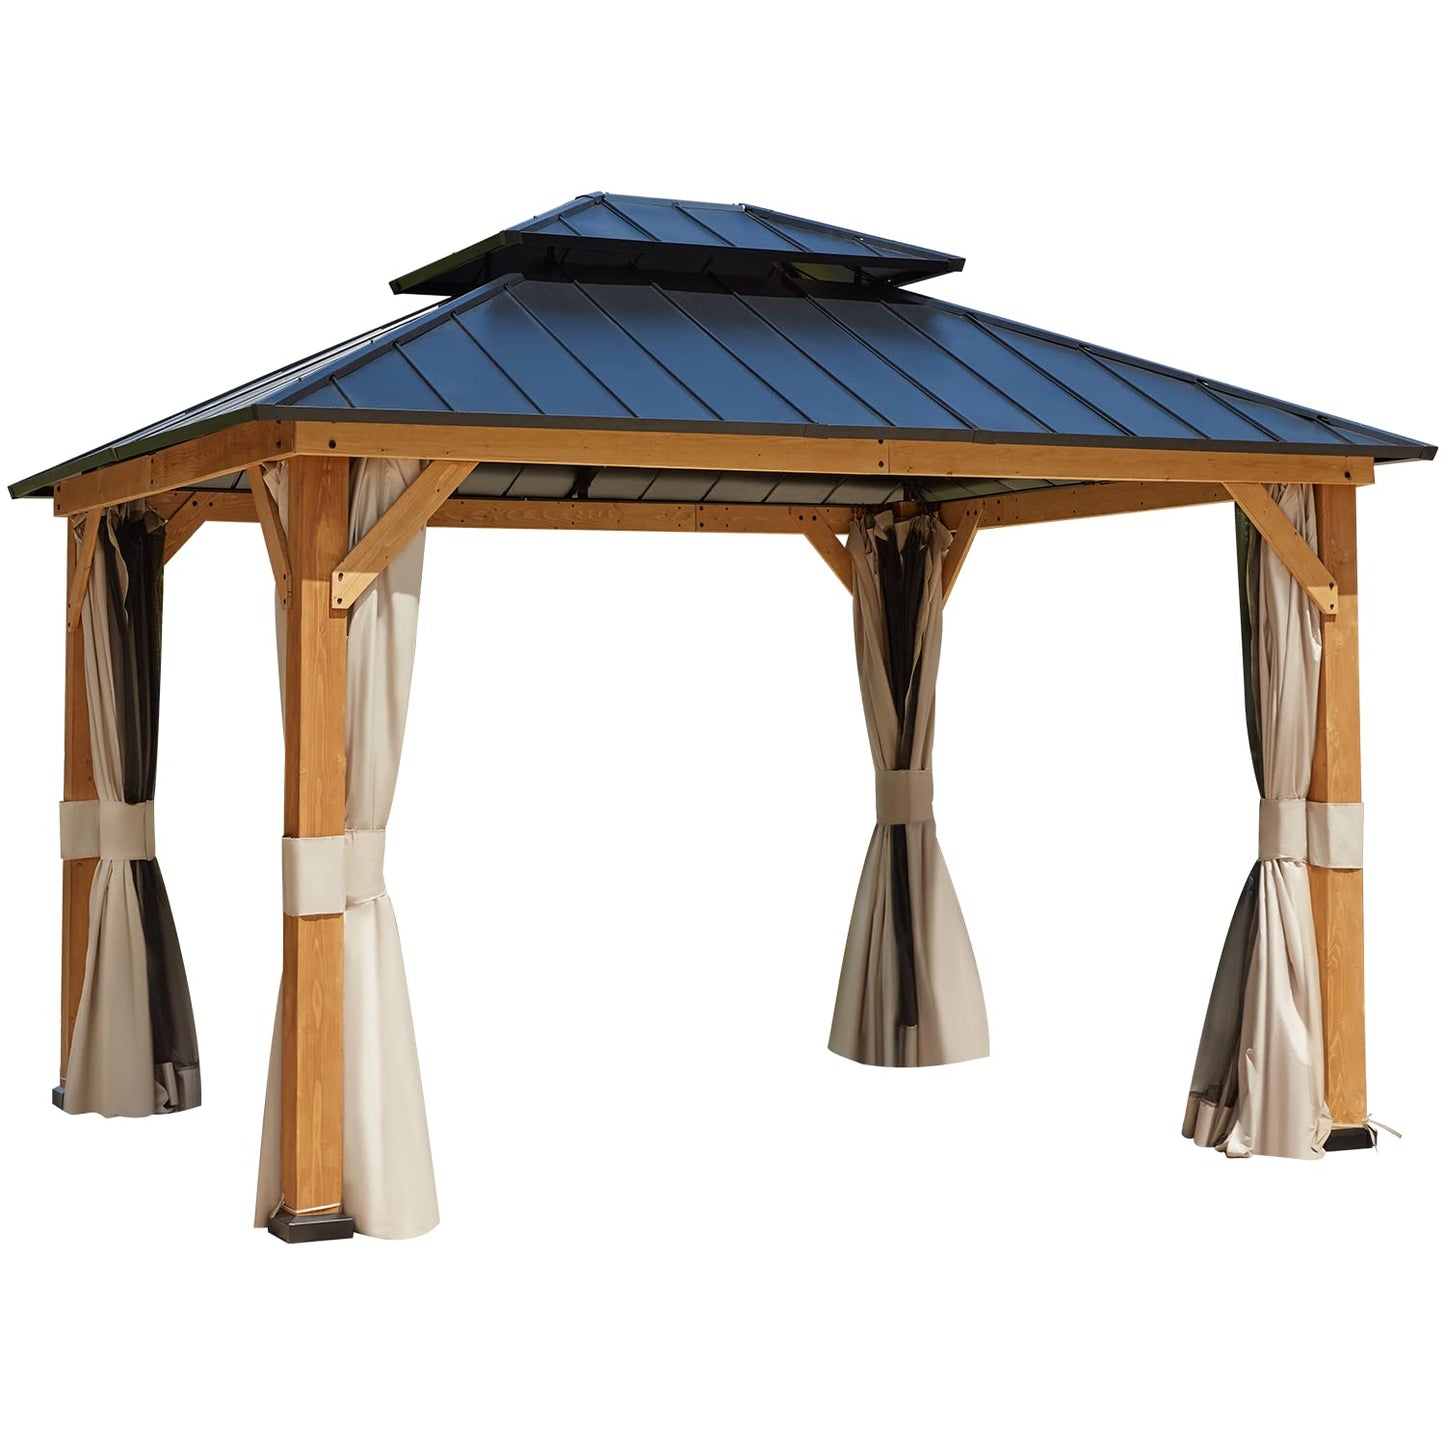 YOLENY 11' x 13' Spruce Wood Gazebo, Outdoor Hardtop Gazebo with Privacy Curtains and Mosquito Netting for Patio, Garden, Backyard